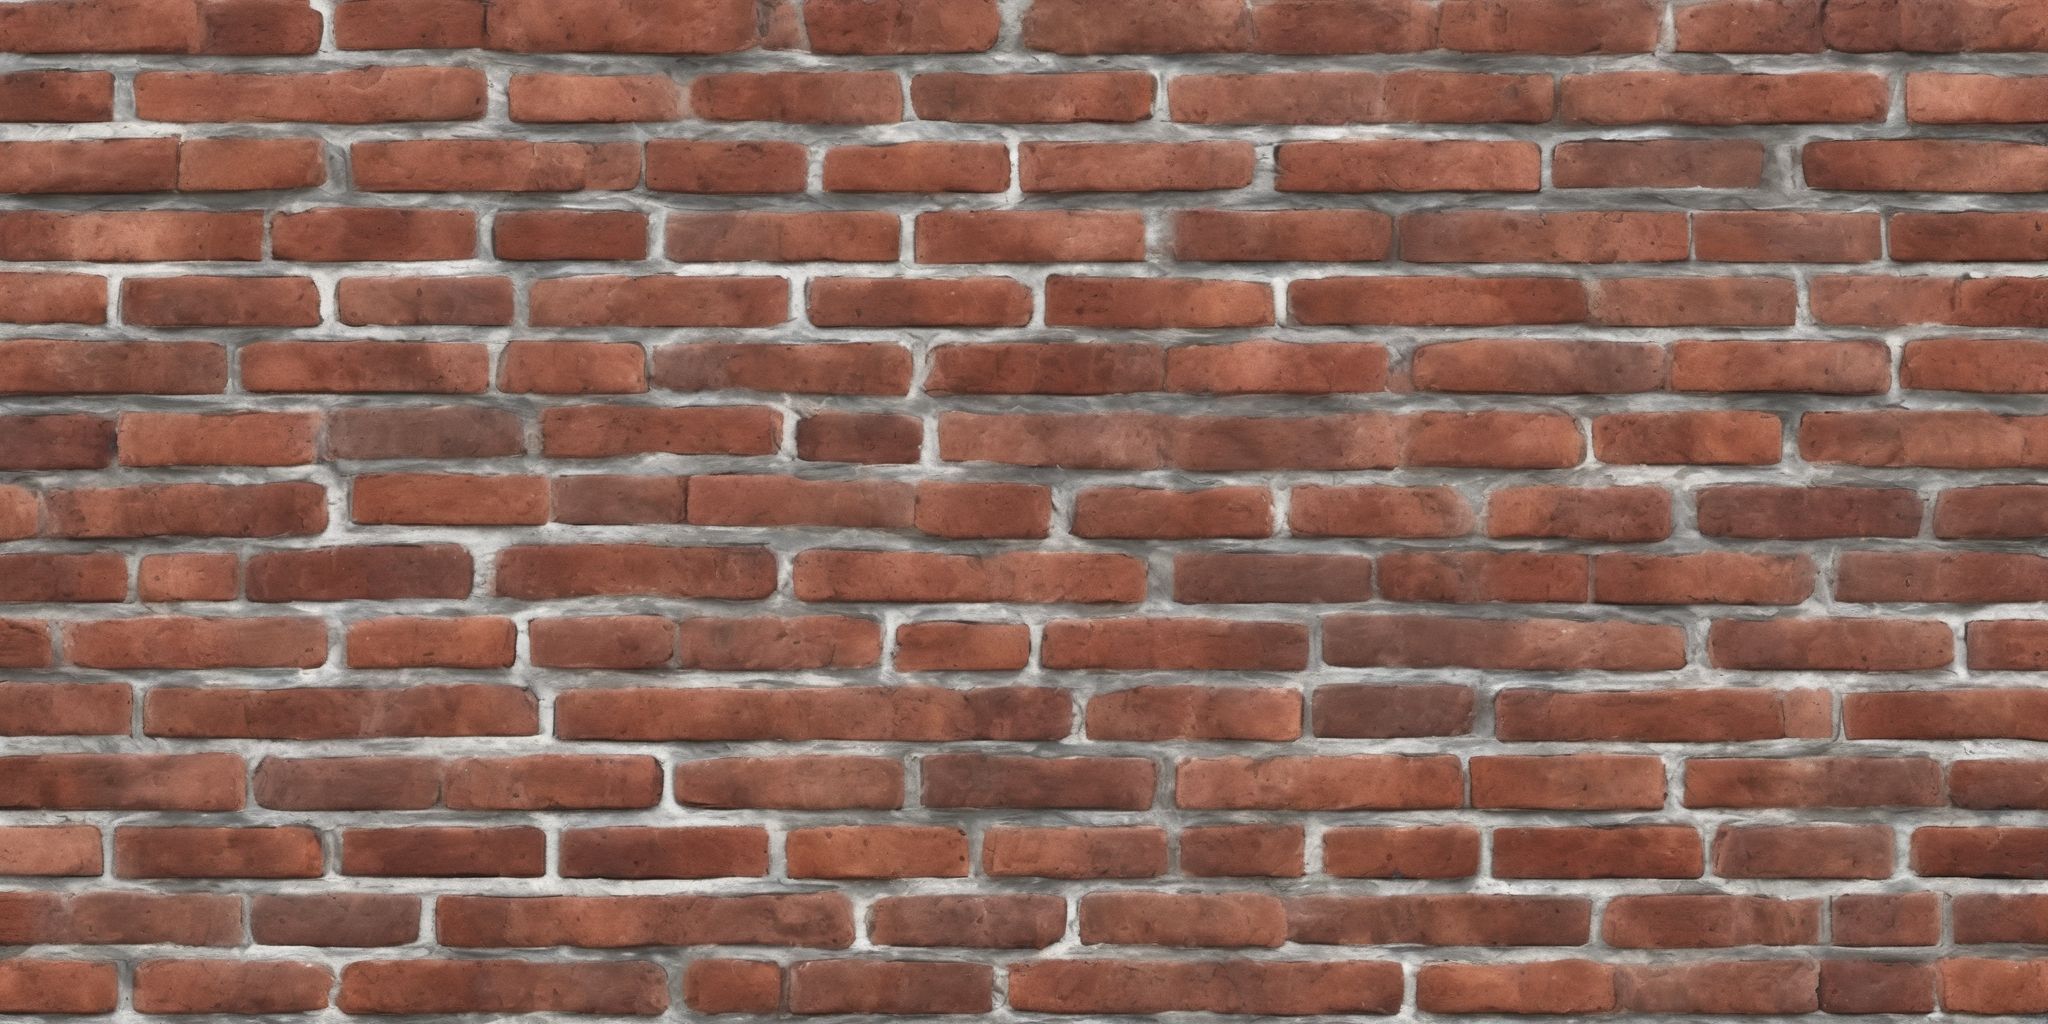 Brick  in realistic, photographic style